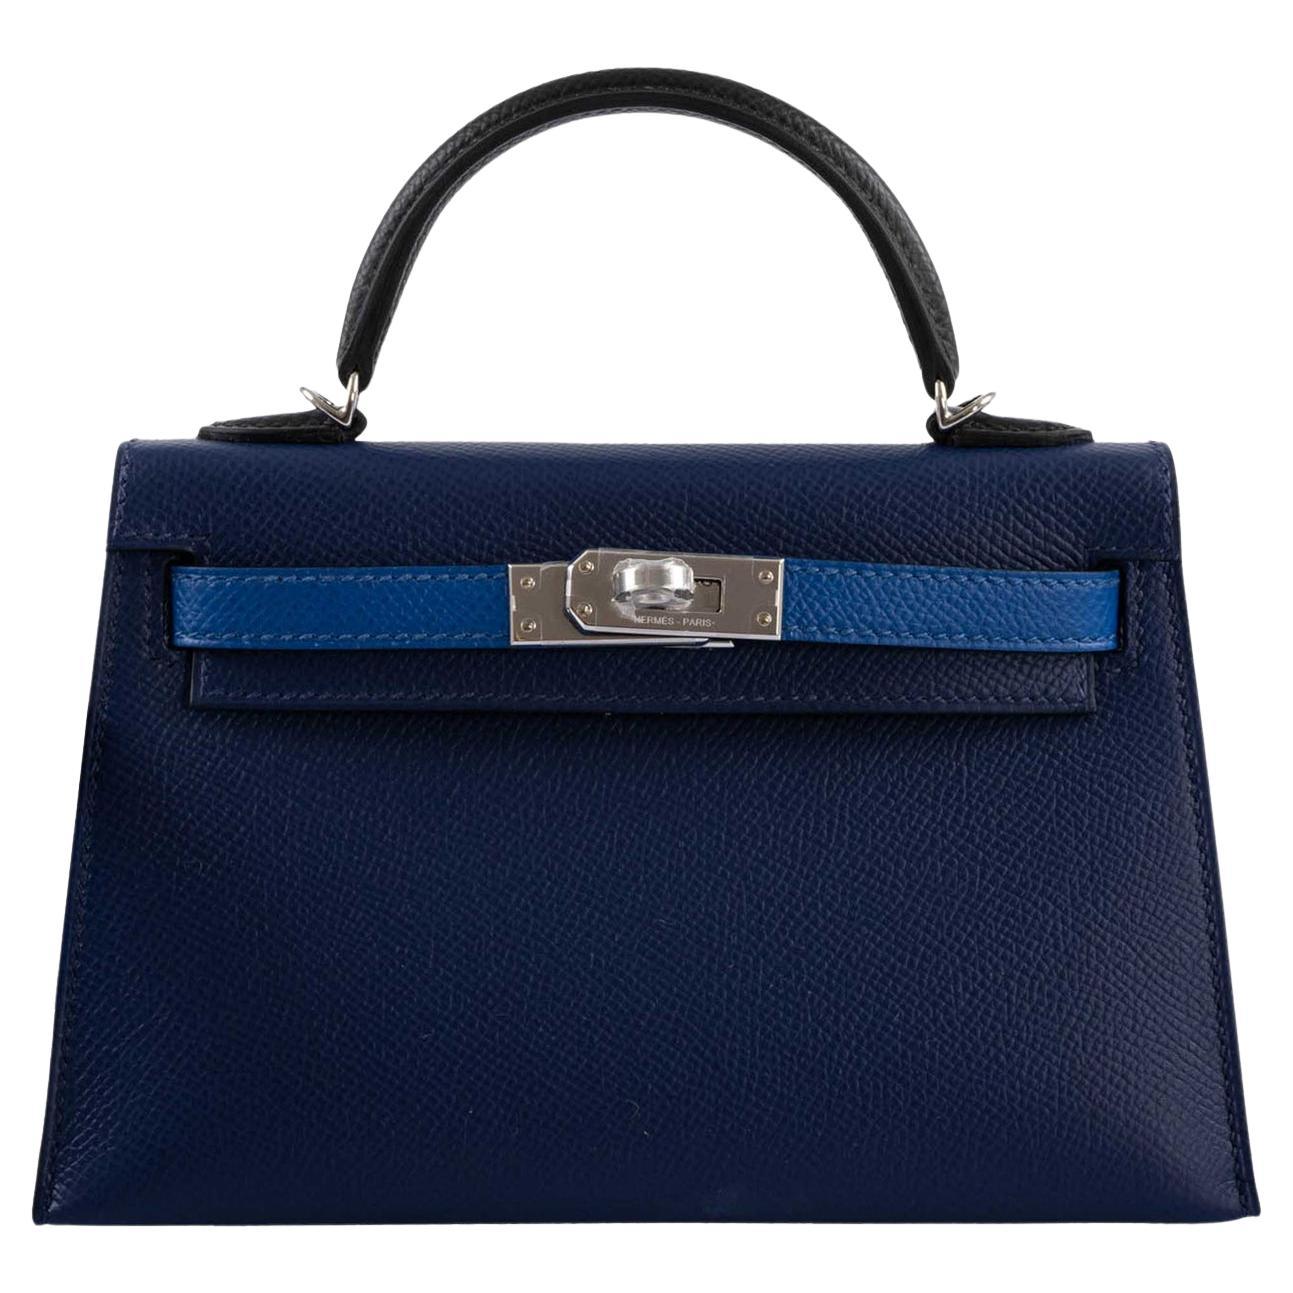 Craie & Etoupe Epsom HSS Sellier Kelly Mini II 20 Permabrass Hardware, 2021, Handbags and Accessories, 2022